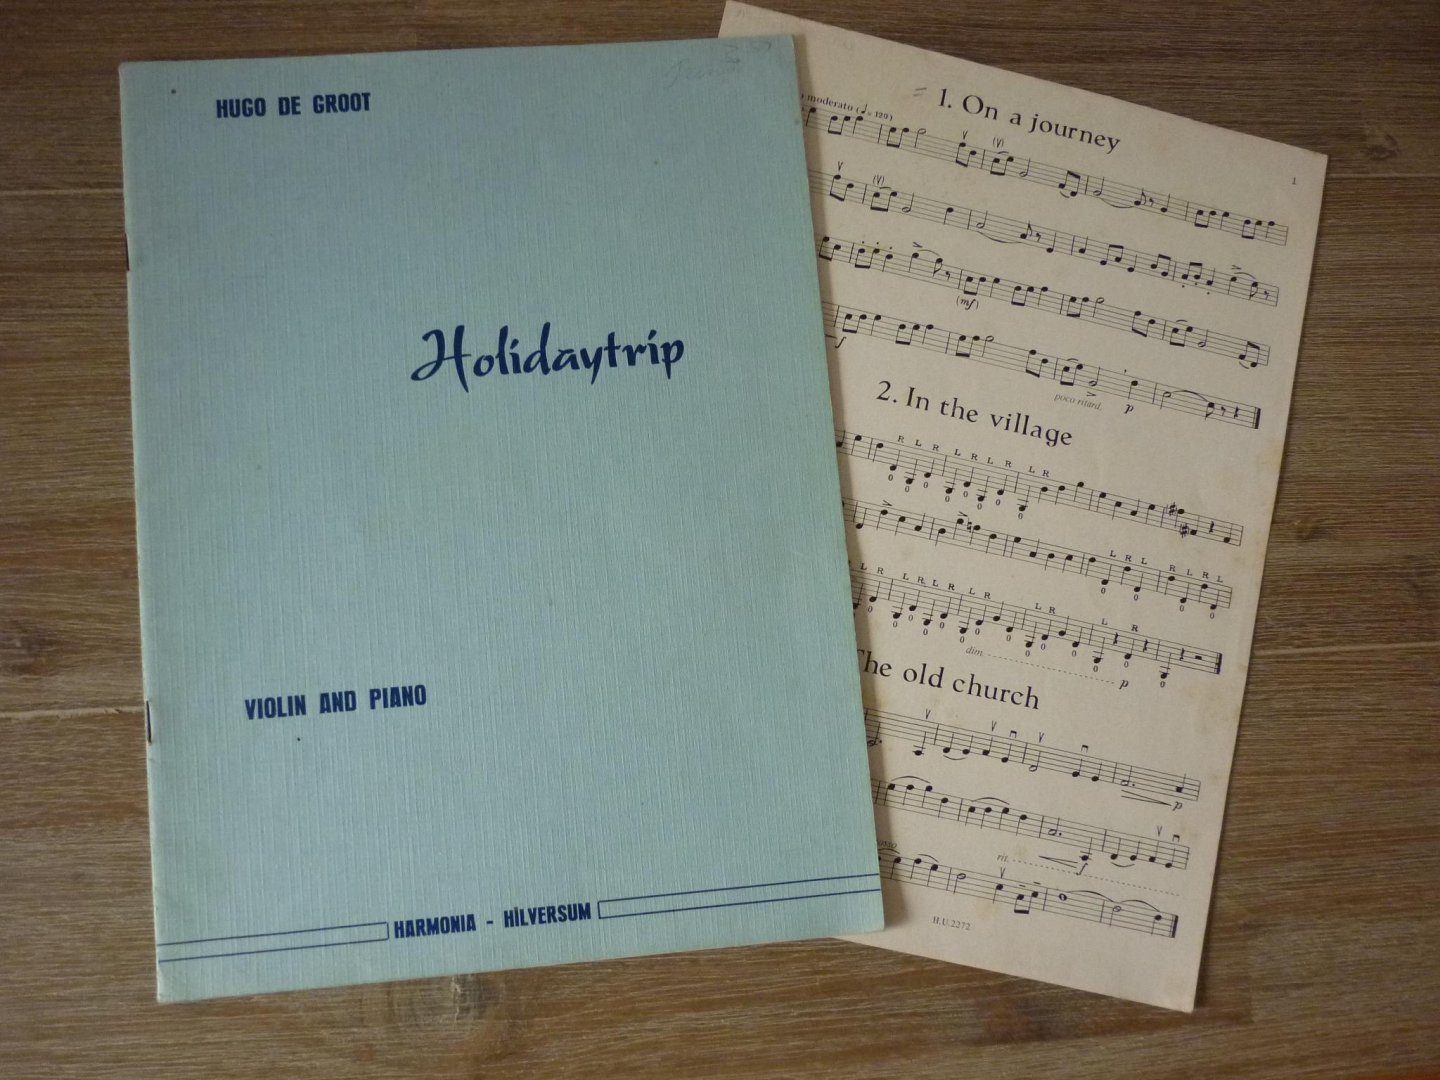 Groot; Hugo de holidaytrip - Holidaytrip; Suite of ten pieces for violin with piano-accompaniment